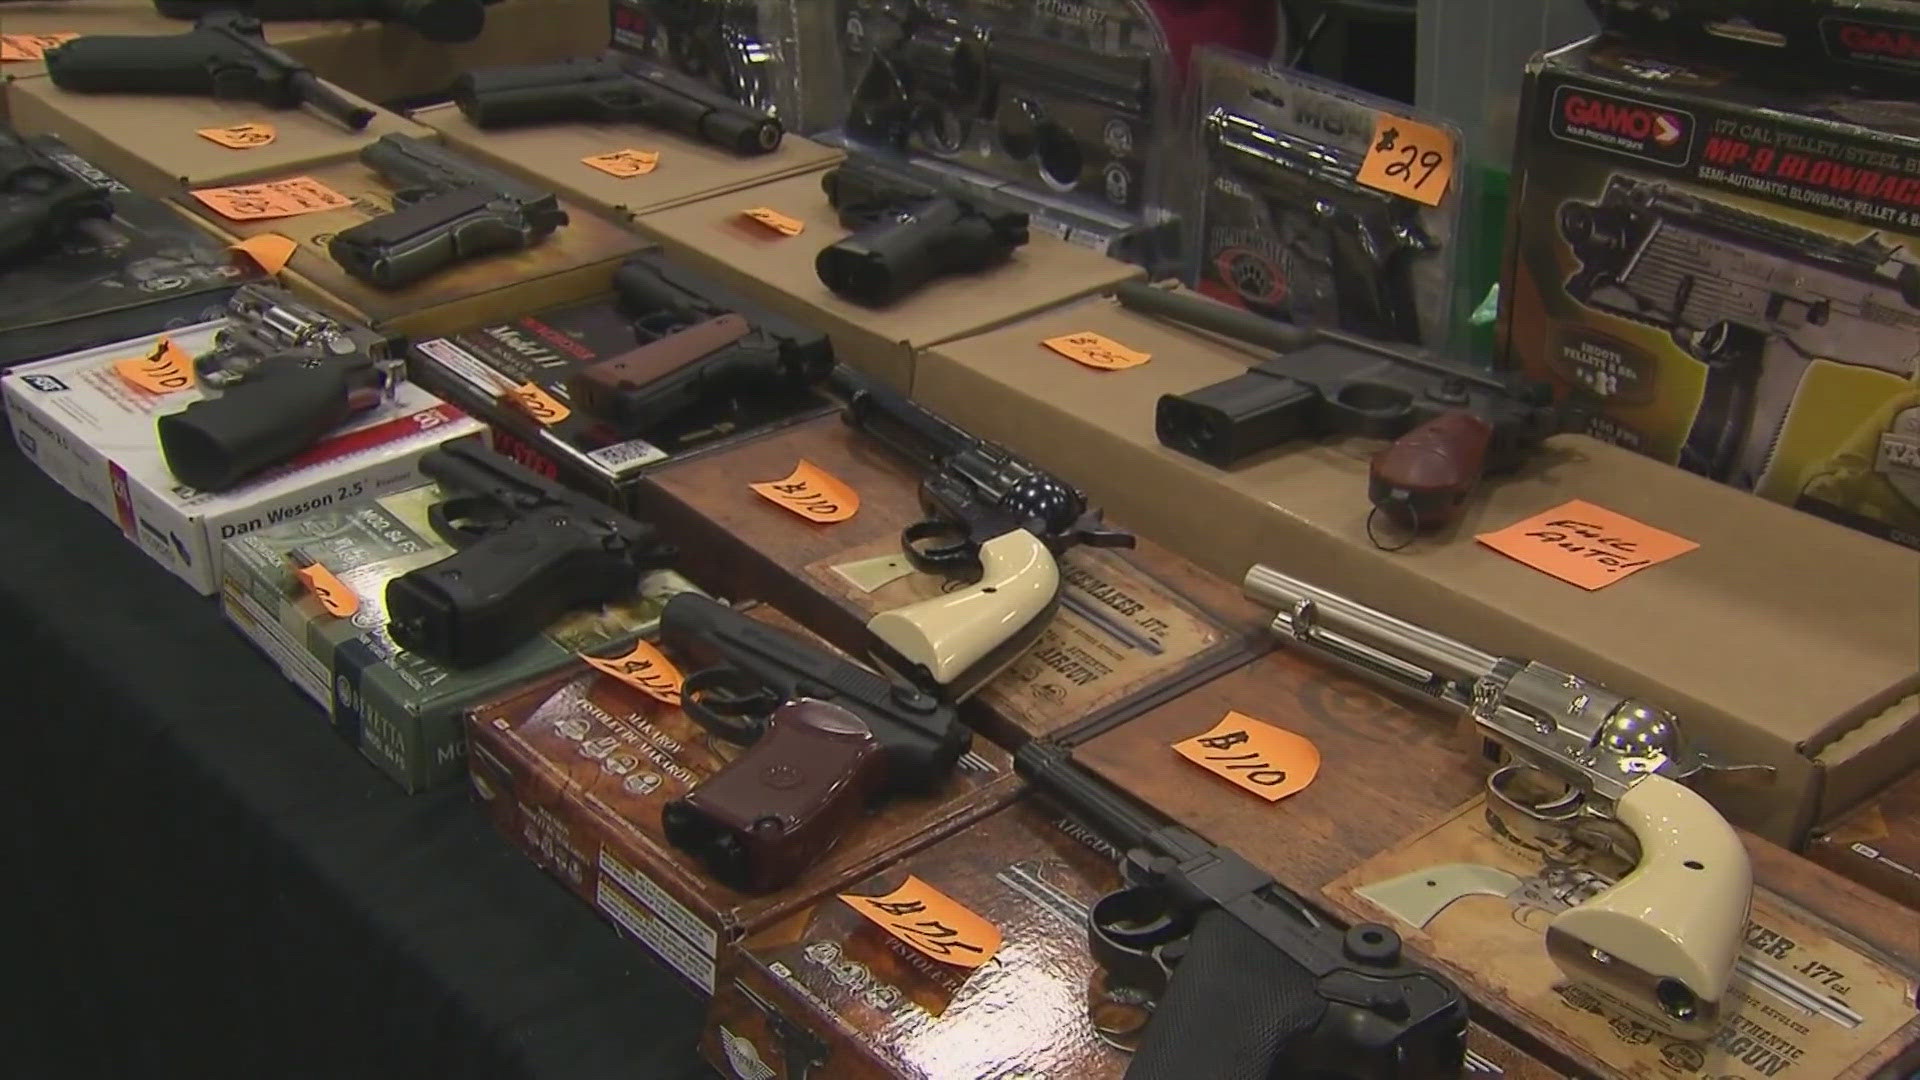 The ordinance will require gun owners to report missing or stolen guns within 48 hours or face a fine.